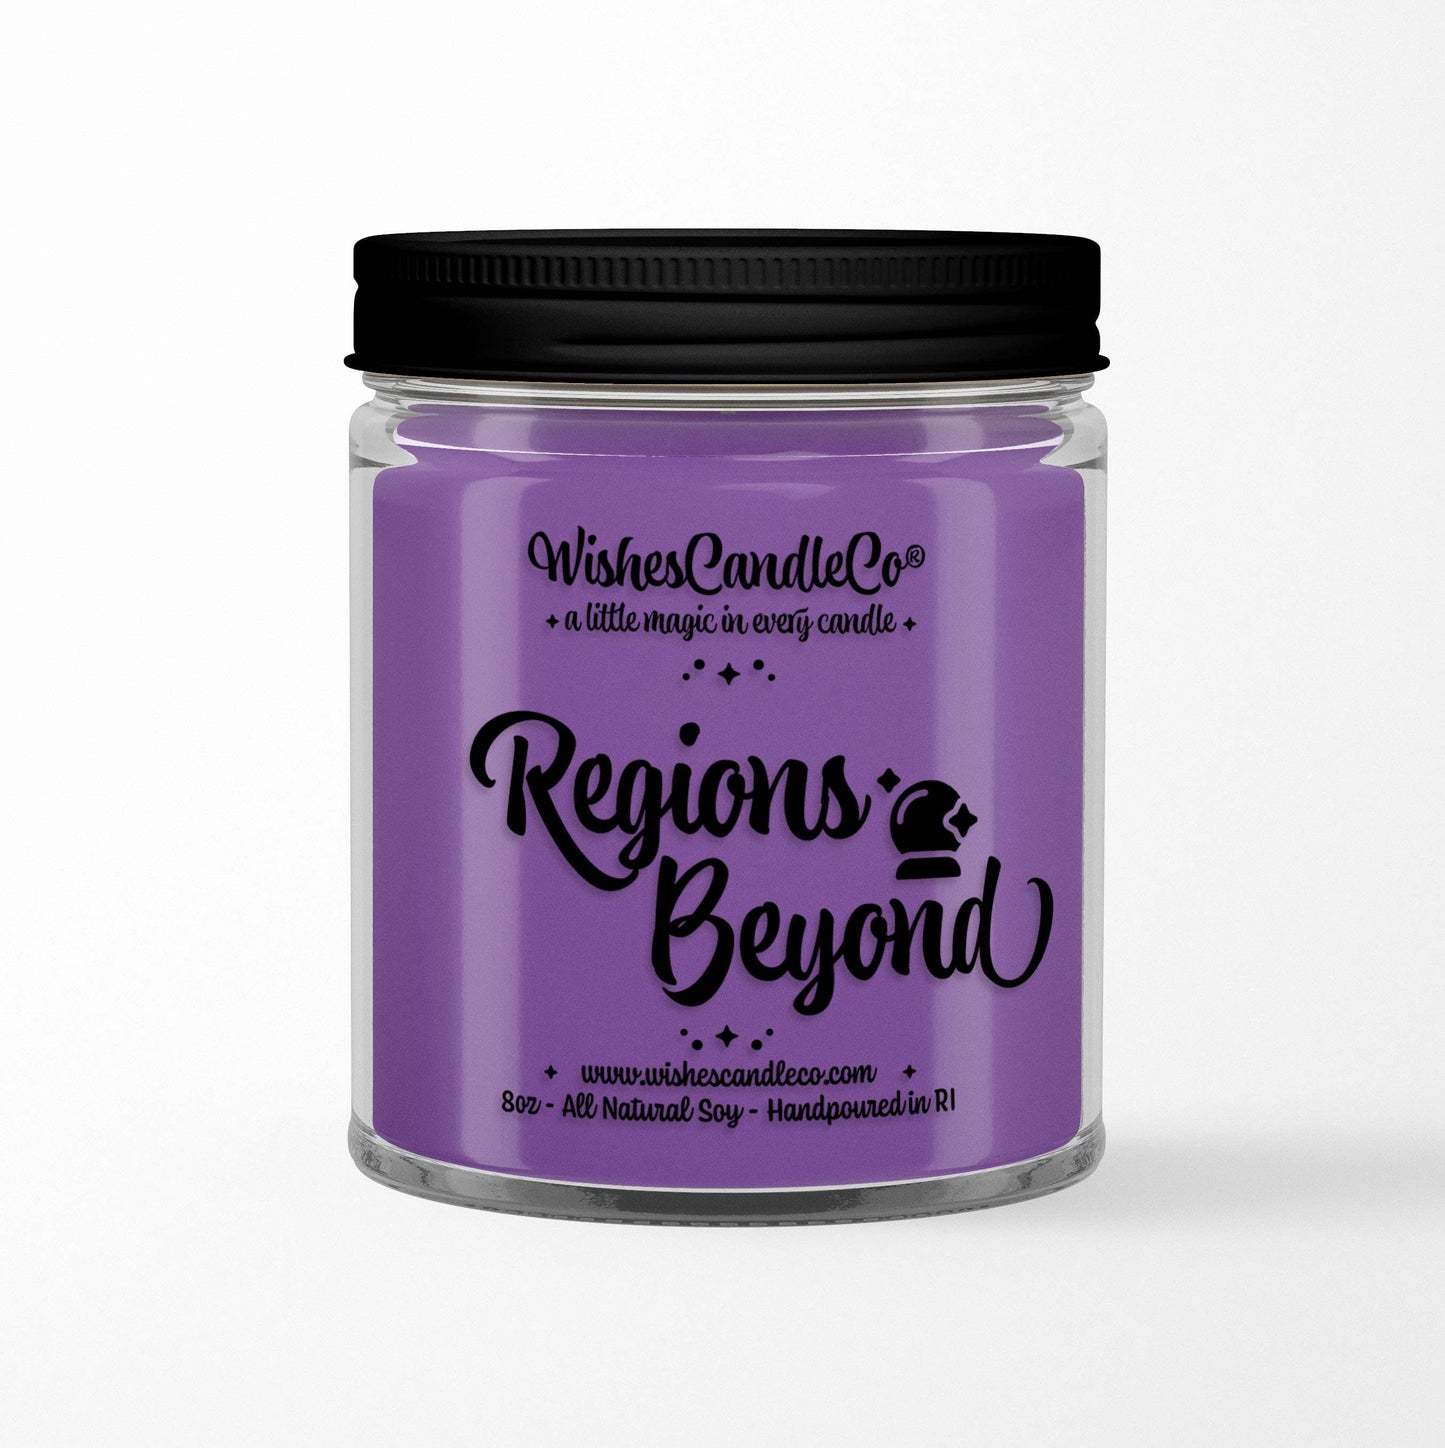 Wishes Candle Co - Regions Beyond 8oz Hidden Pin Candle